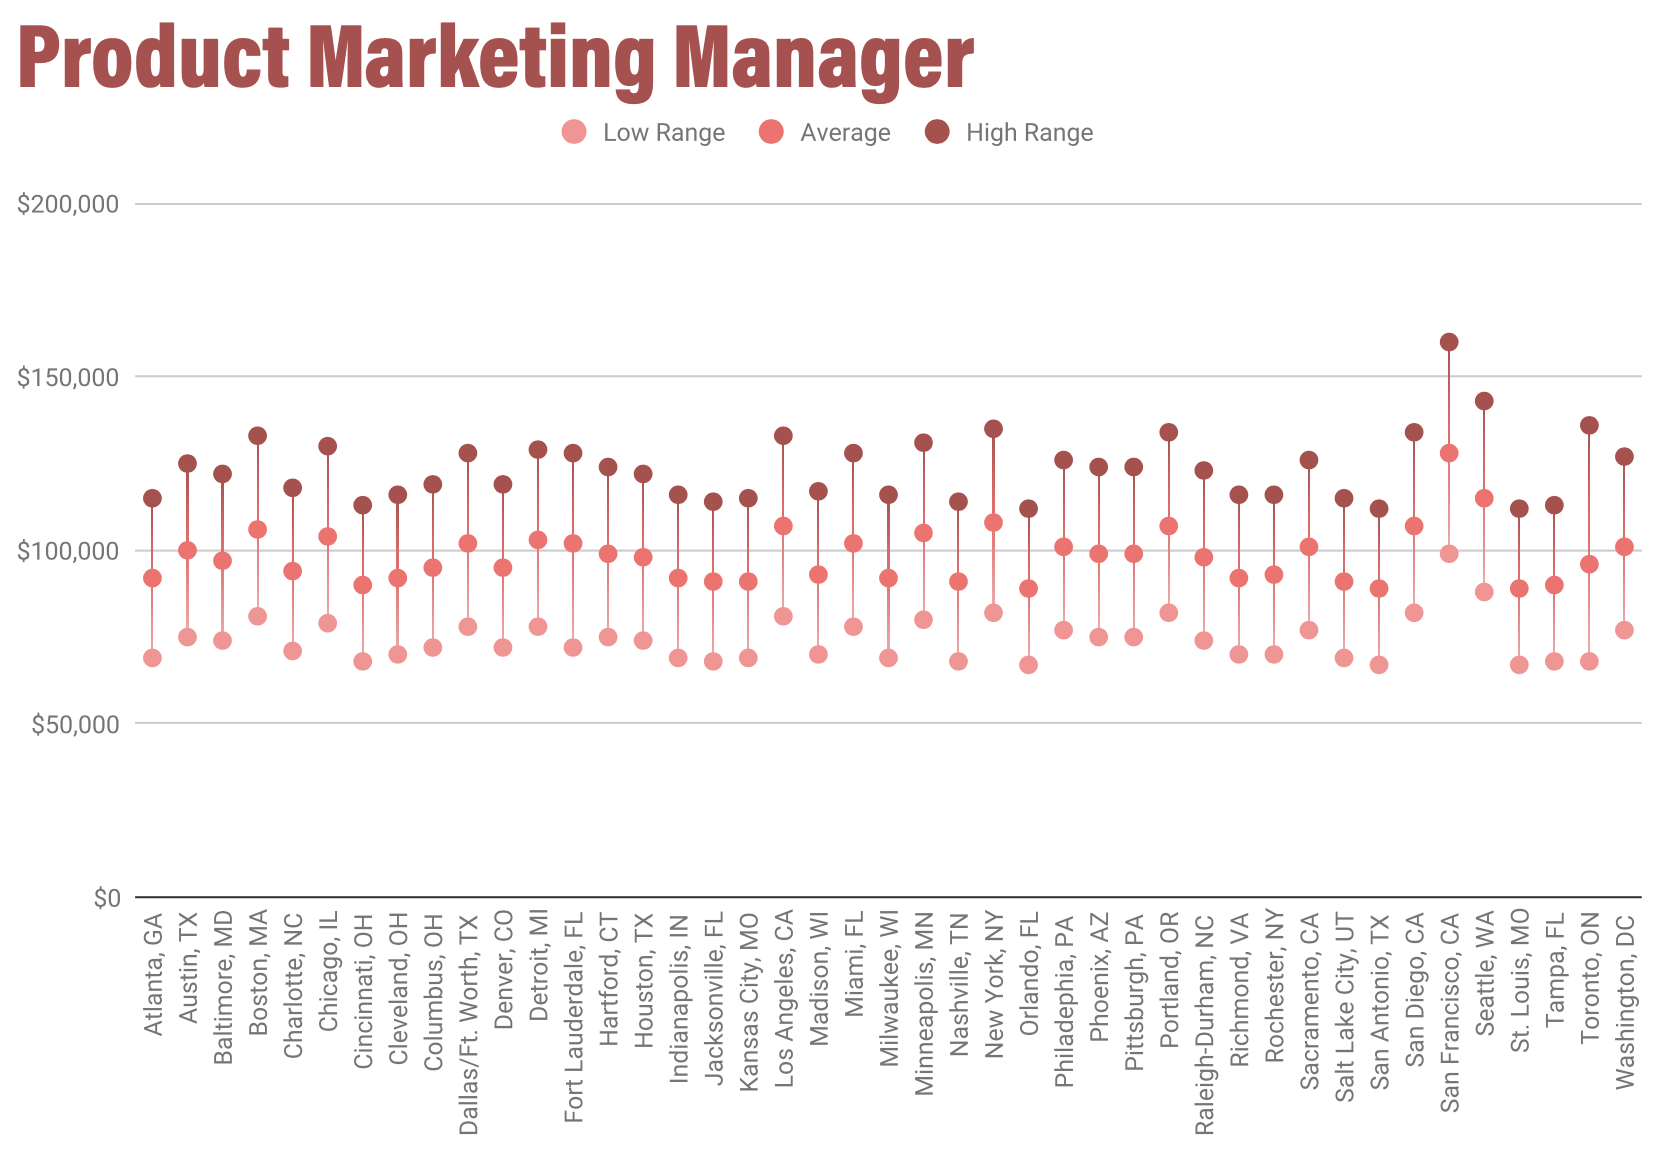 /uploads/2020/01/Product_Marketing_Manager_Salaries.png